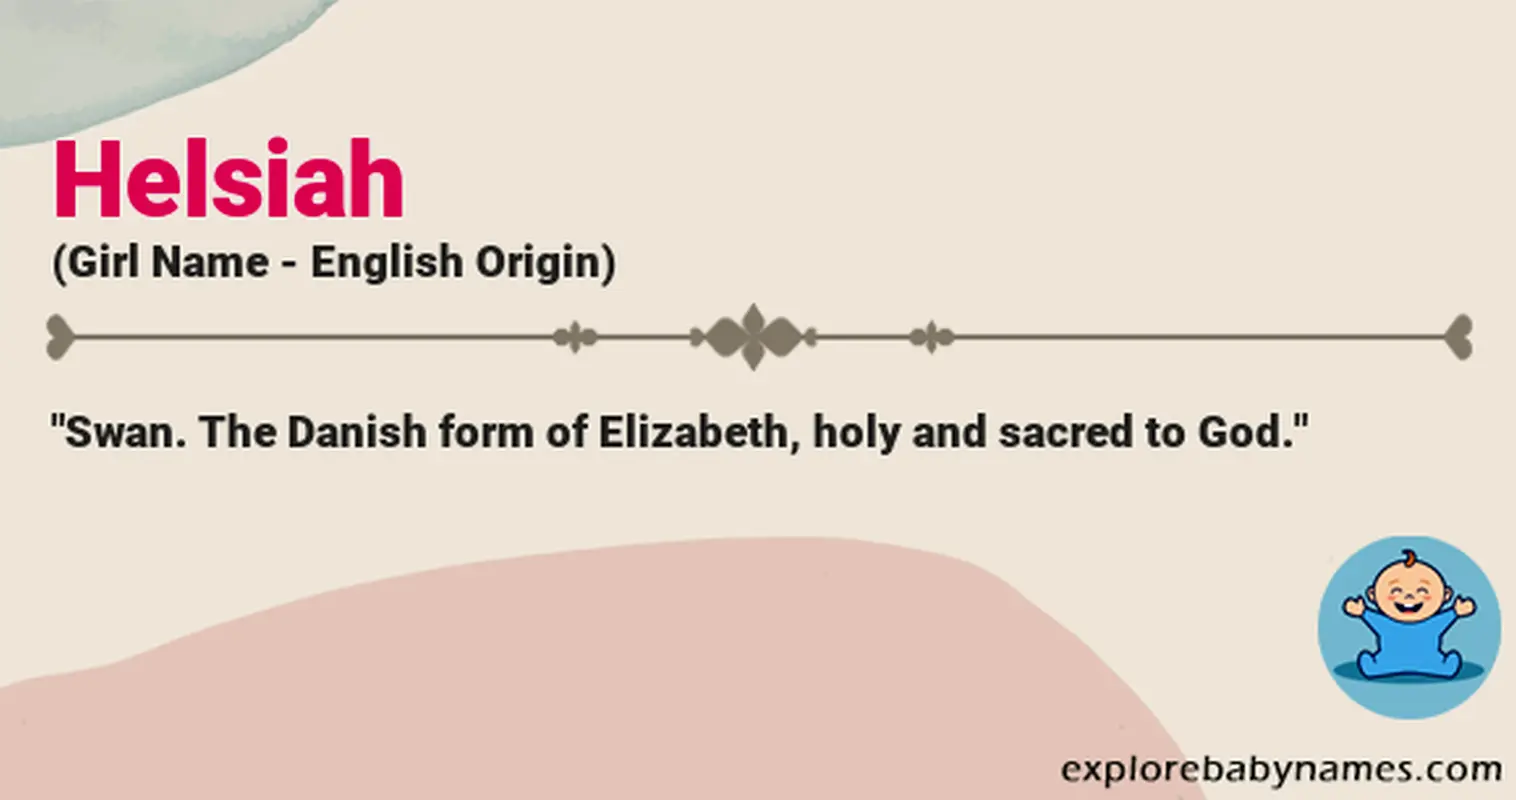 Meaning of Helsiah